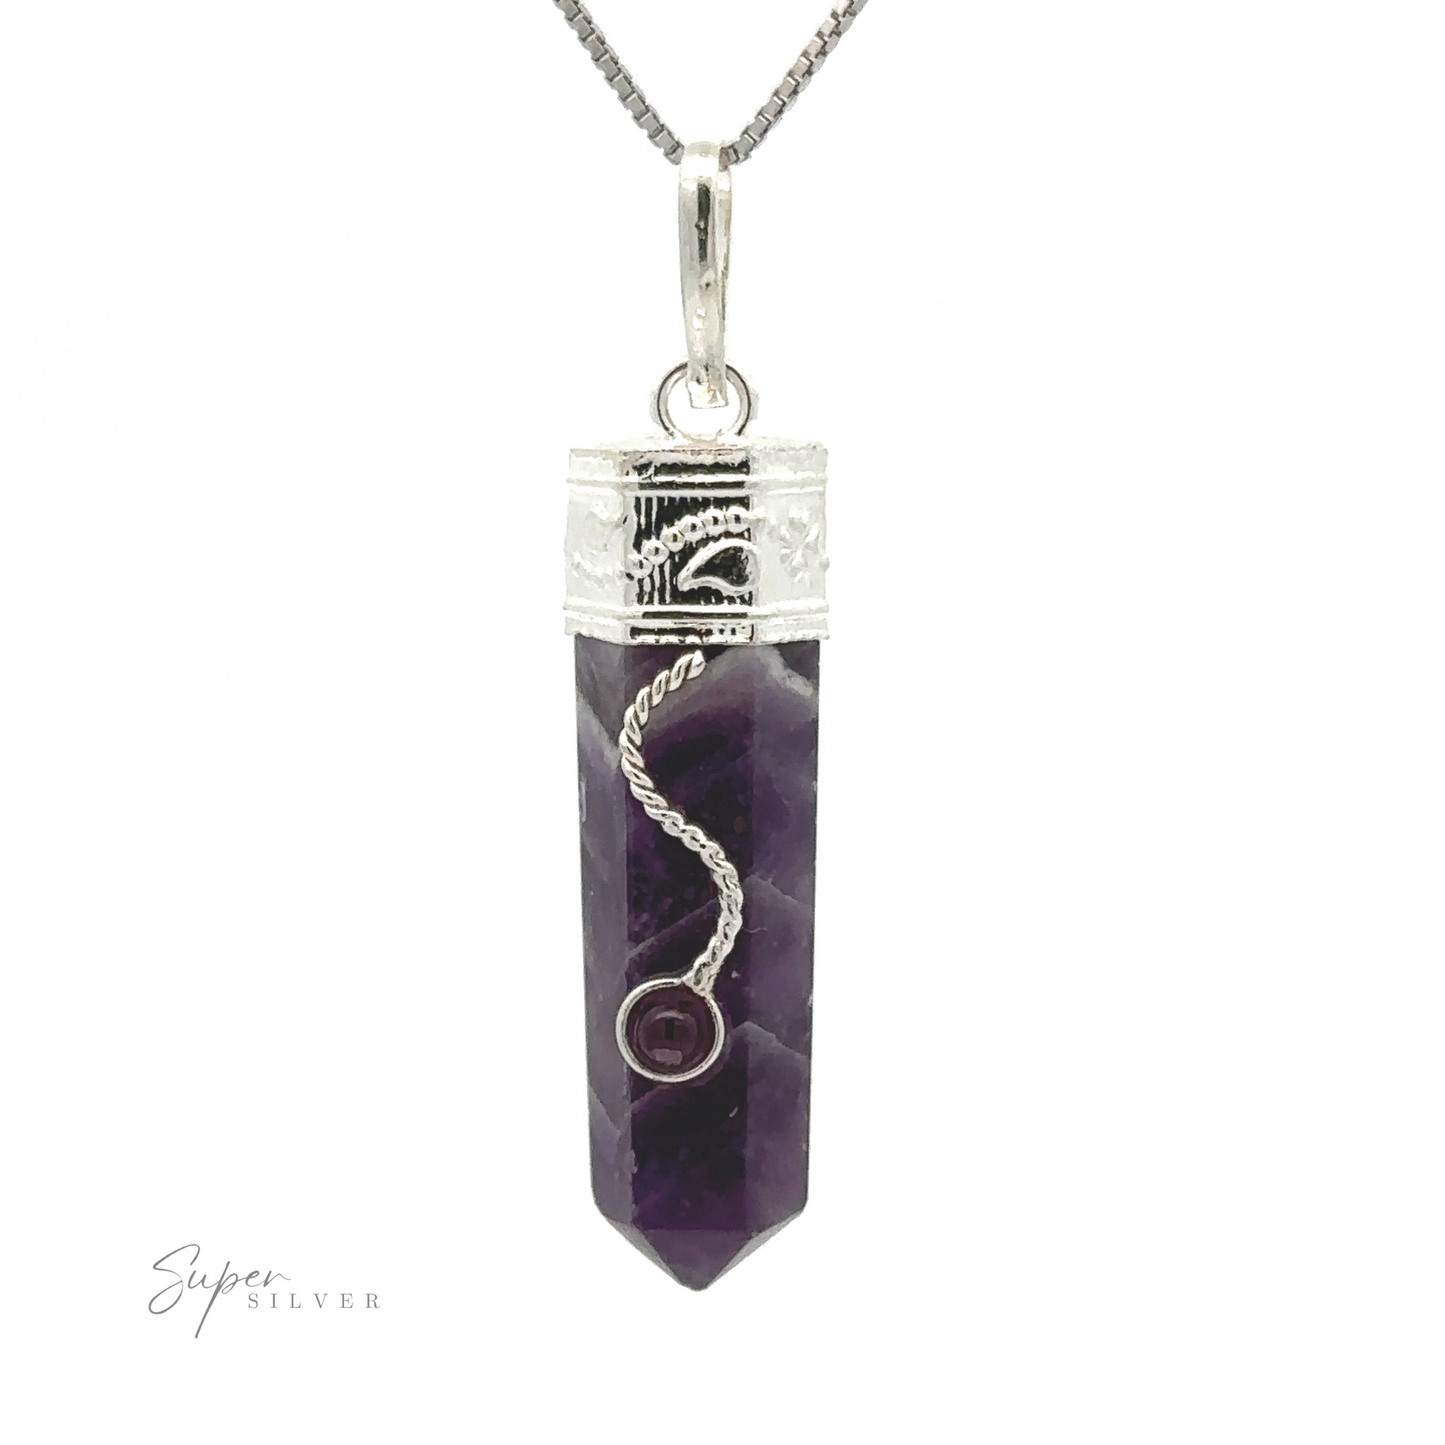 
                  
                    Sure, here is the sentence with the product name replaced:

A Crystal Pendant with Decorative Bail featuring a faceted purple crystal with silver accents and a decorative silver spiral detail, complemented by a delicate garnet detail.
                  
                